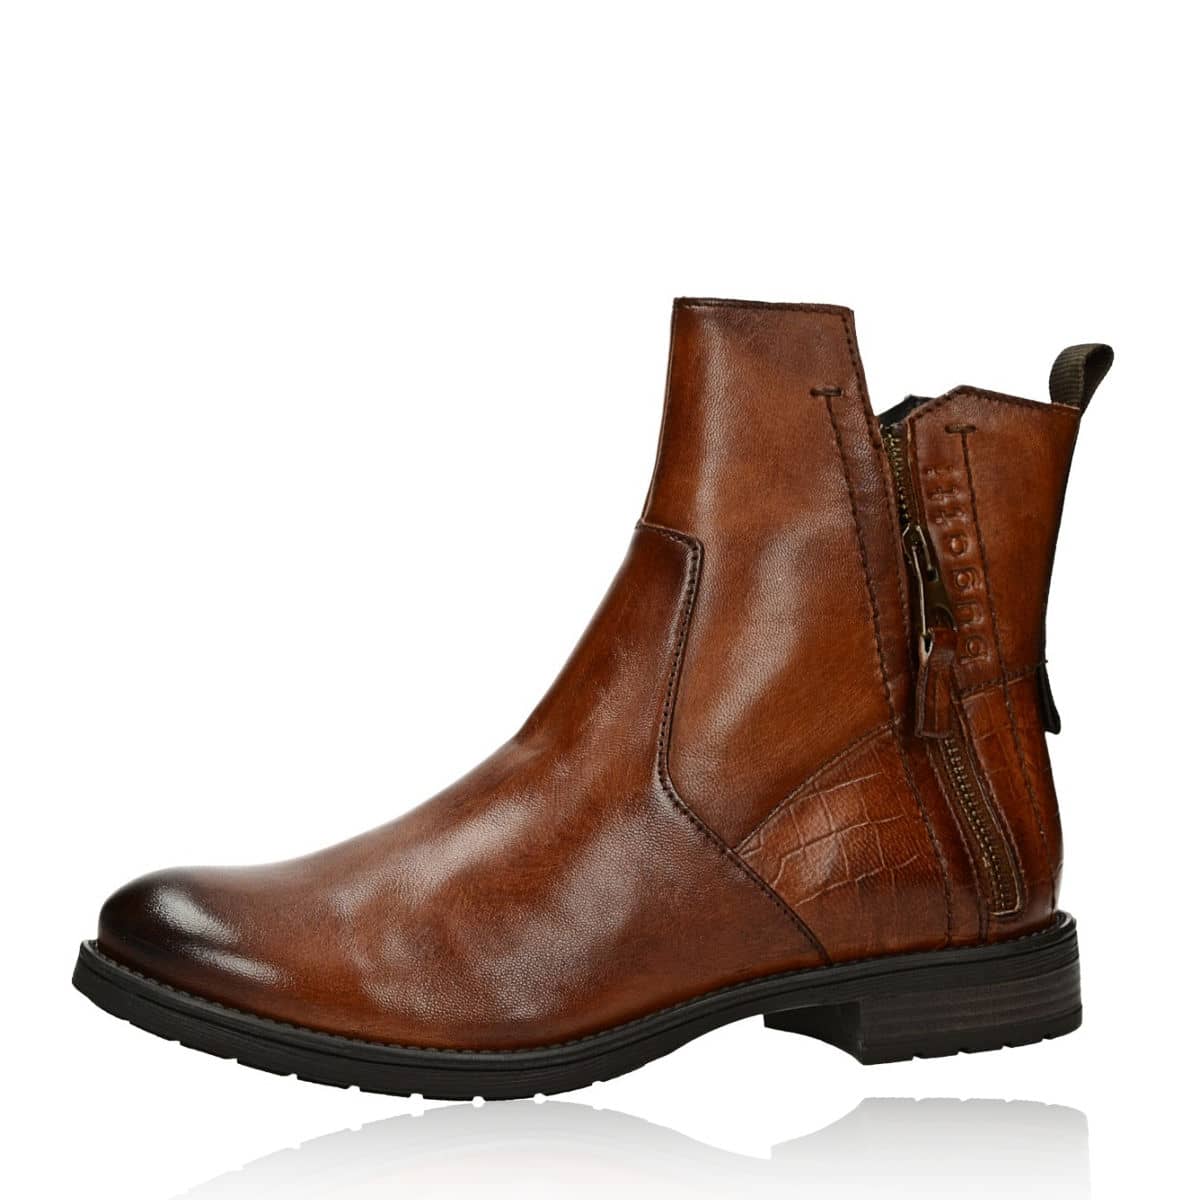 Bugatti women´s leather ankle boots - cognac brown